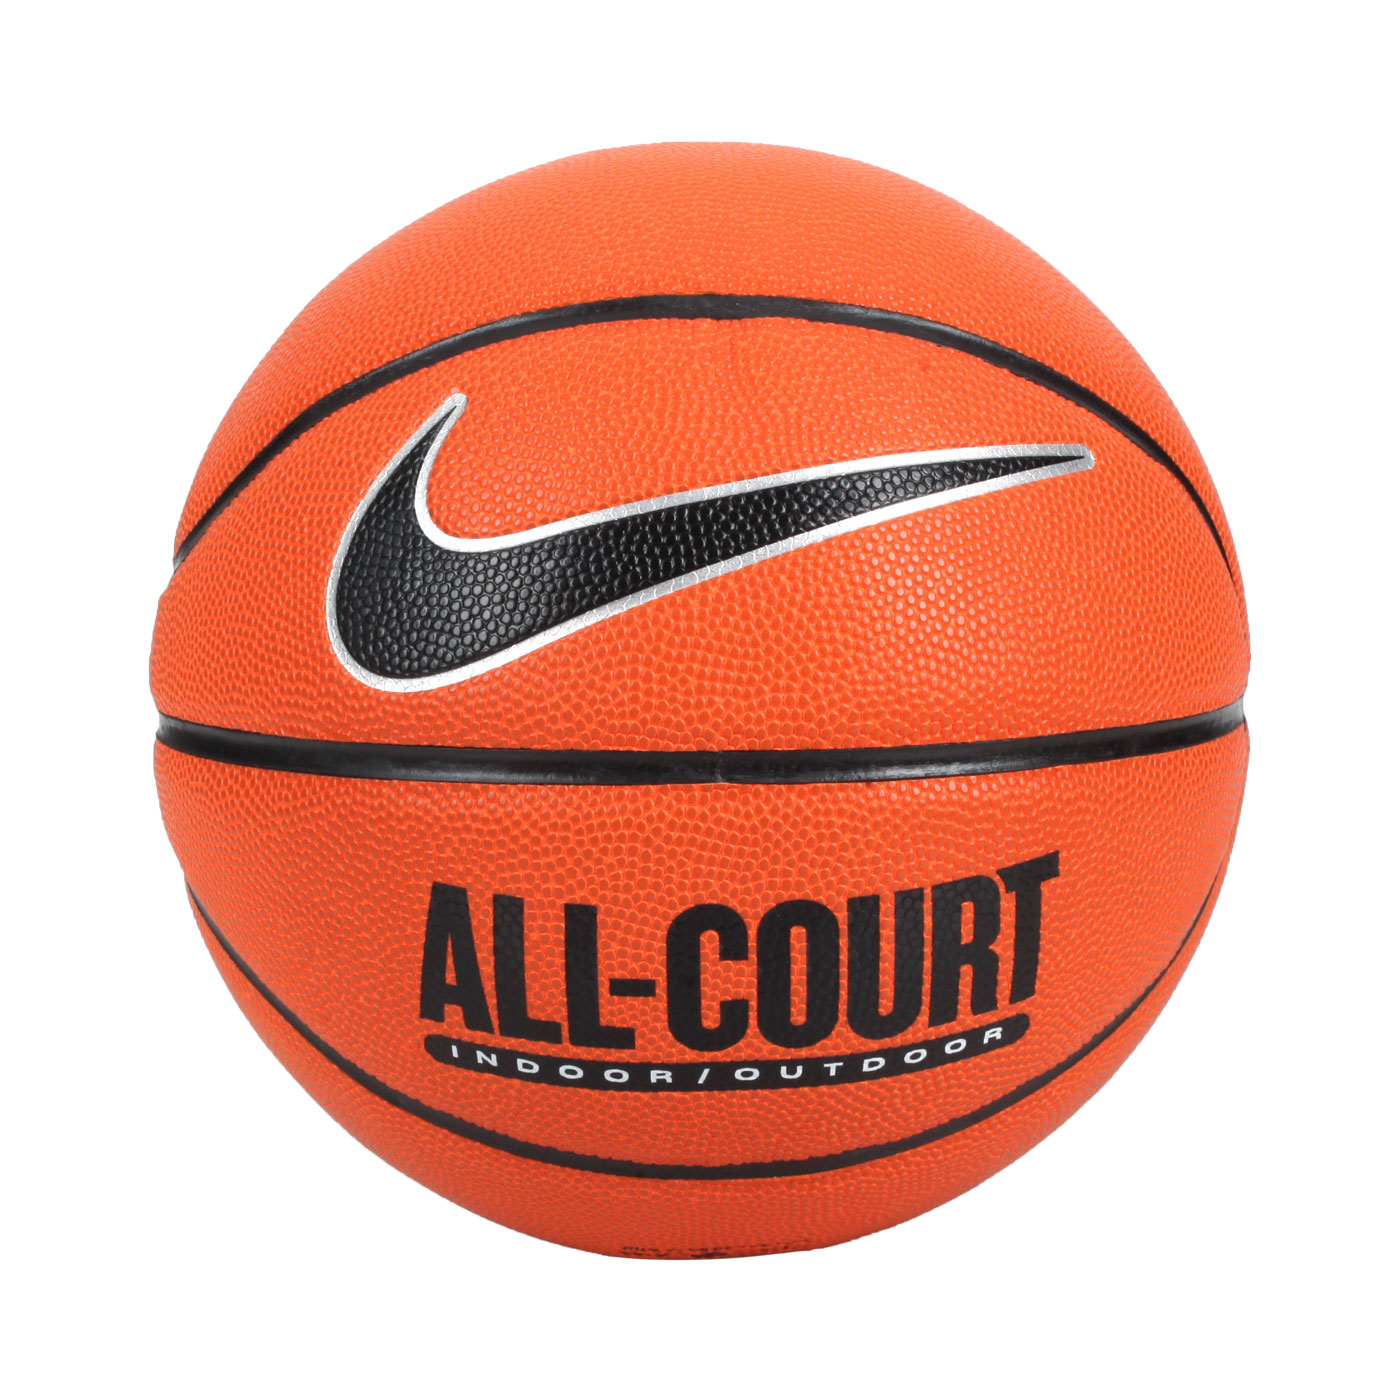 NIKE EVERTDAY ALL COURT 8P 6號籃球 N100436985506 - 橘黑銀